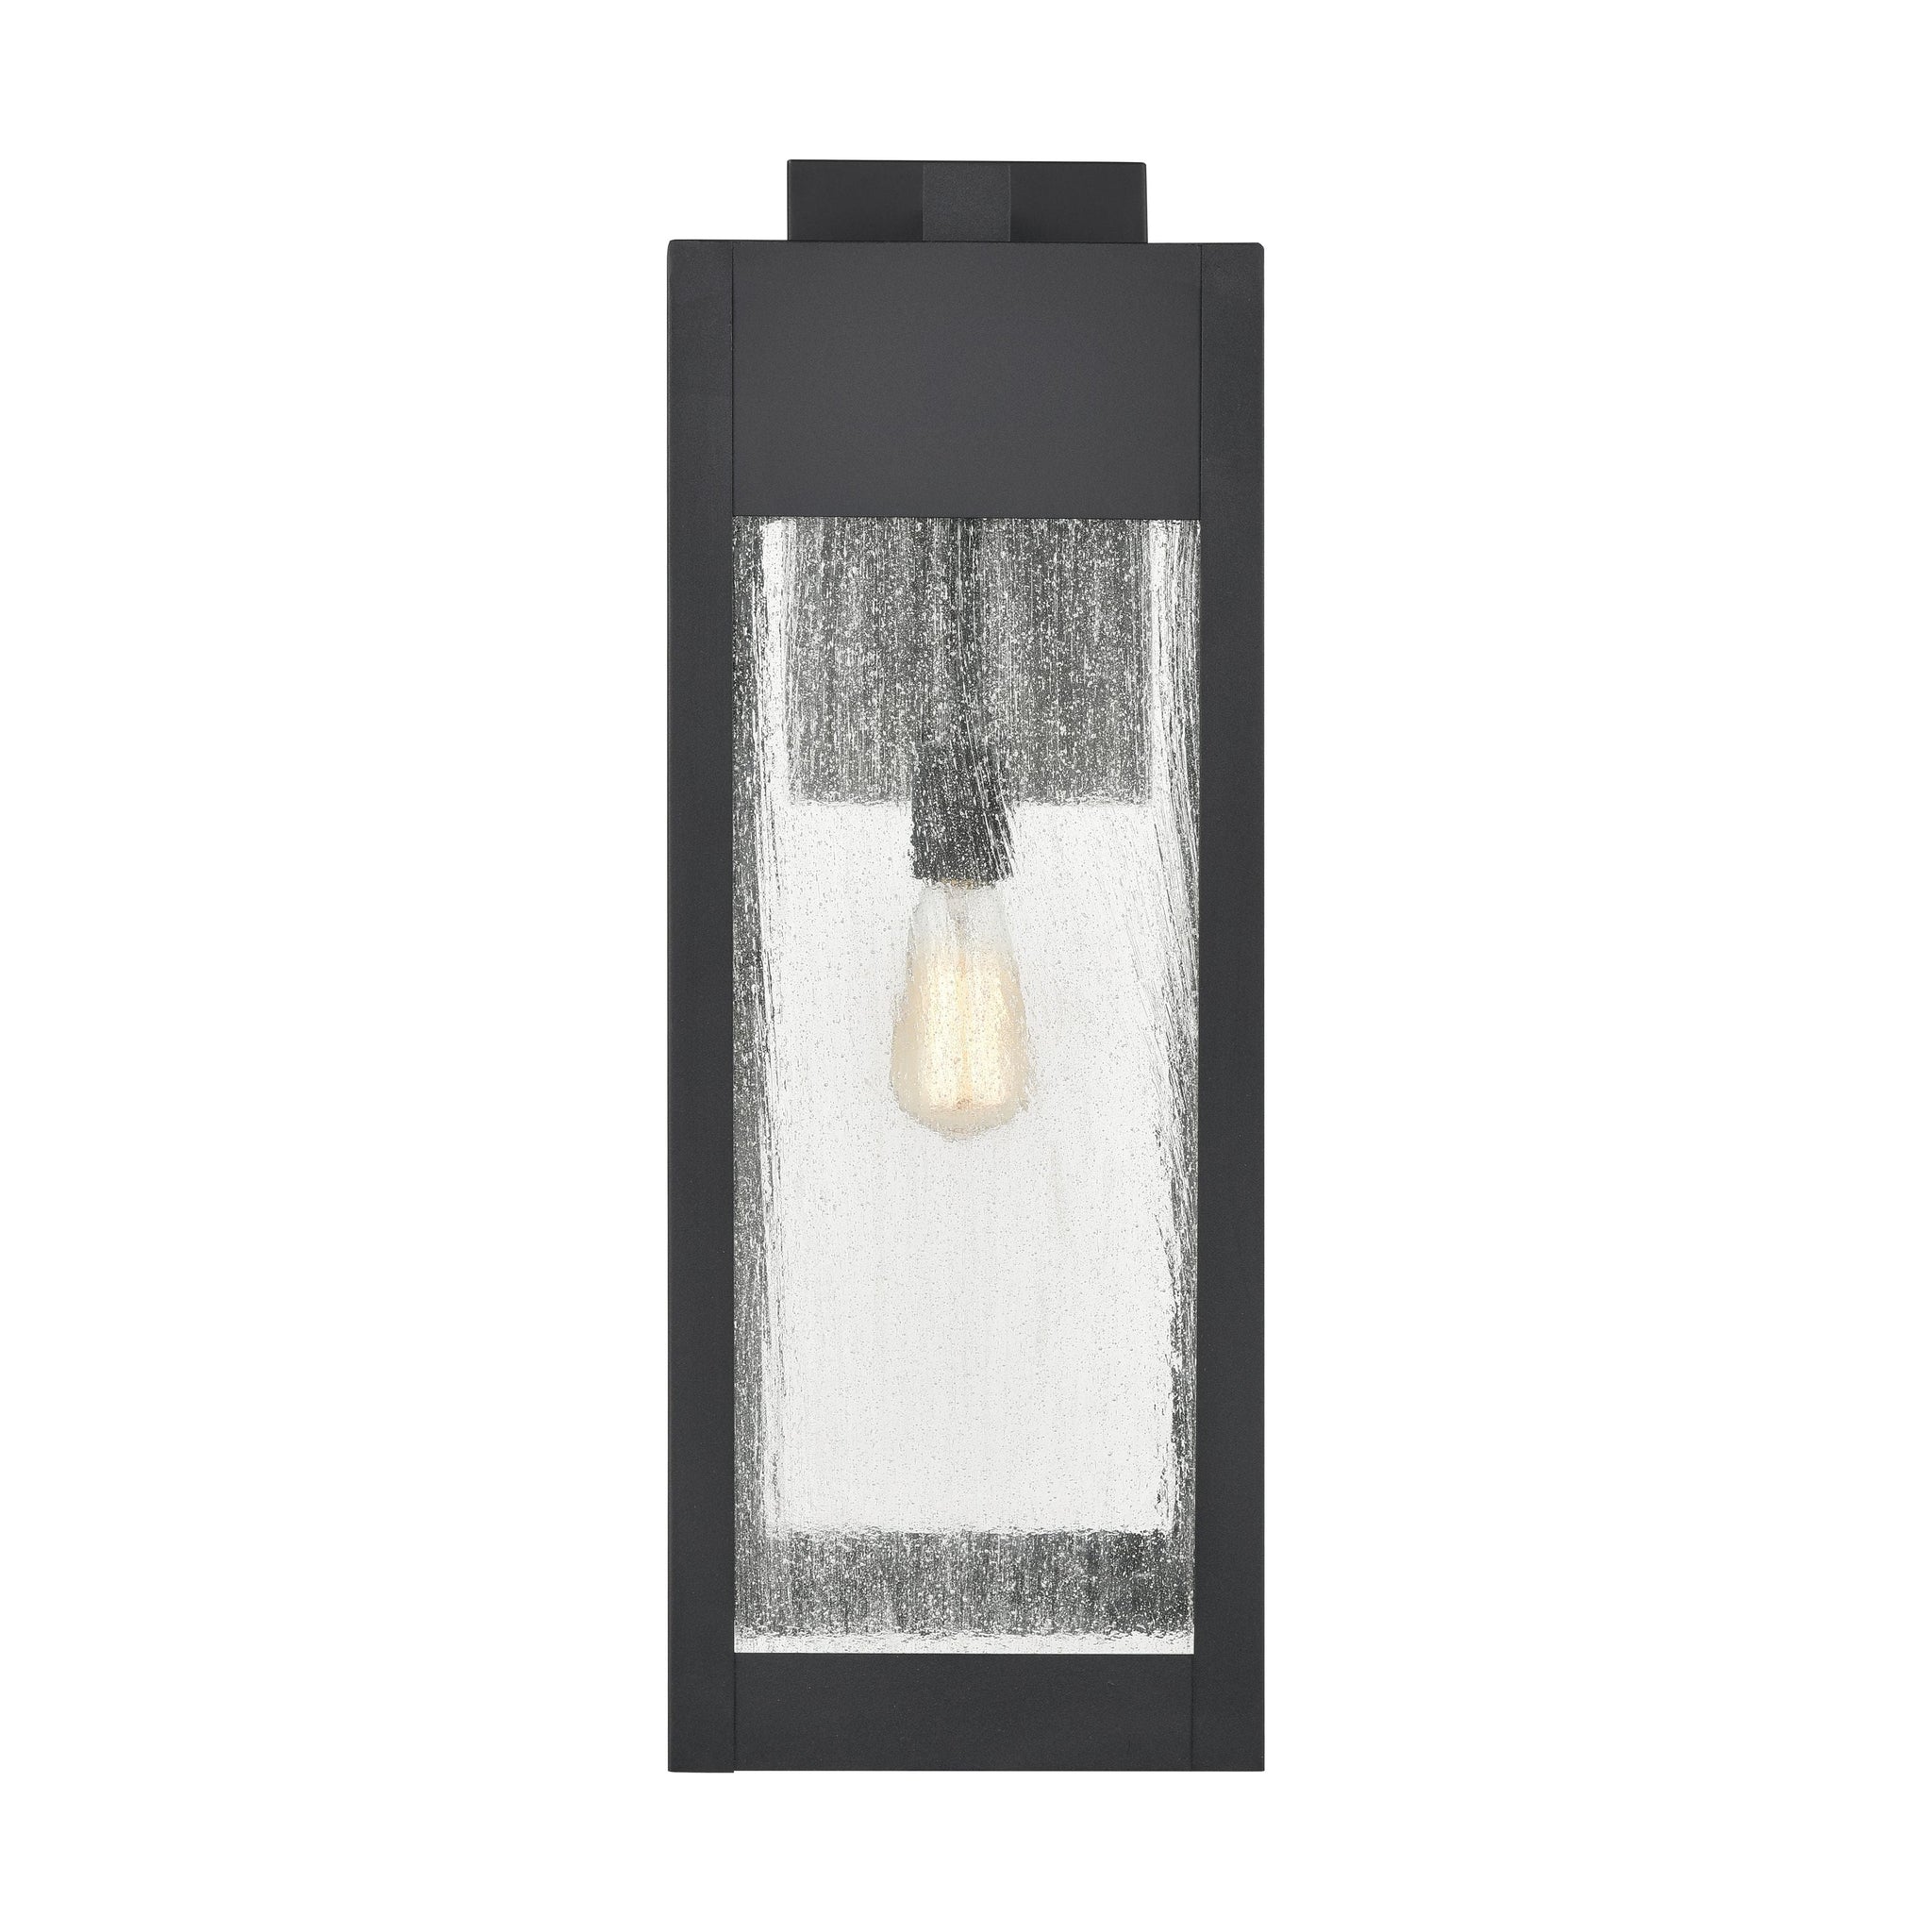 Angus 26.25" High 1-Light Outdoor Sconce